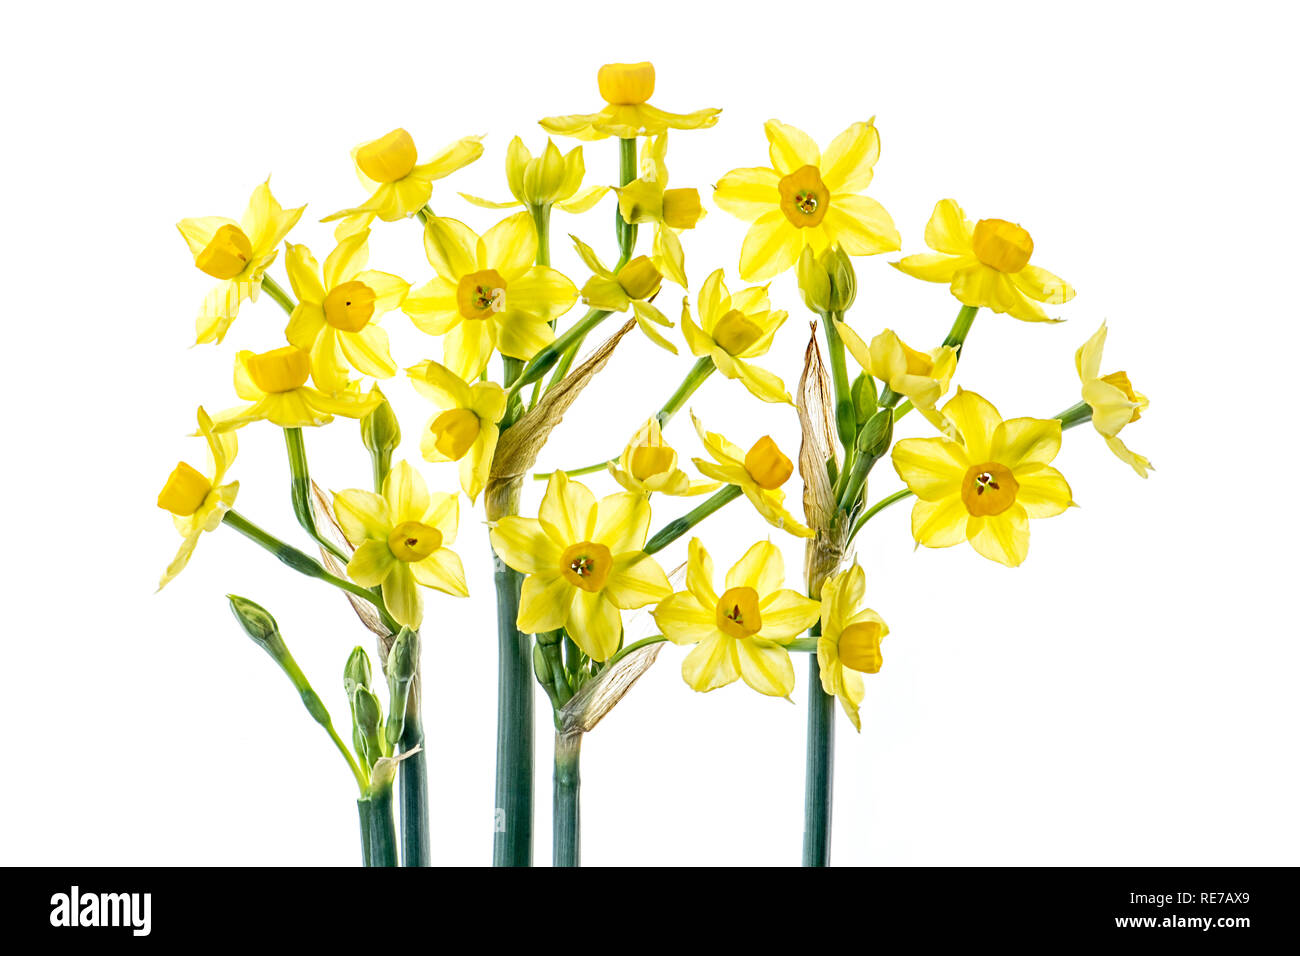 Close-up, High-key image of beautiful spring flowering, yellow Daffodil flowers also known as Narcissus Stock Photo